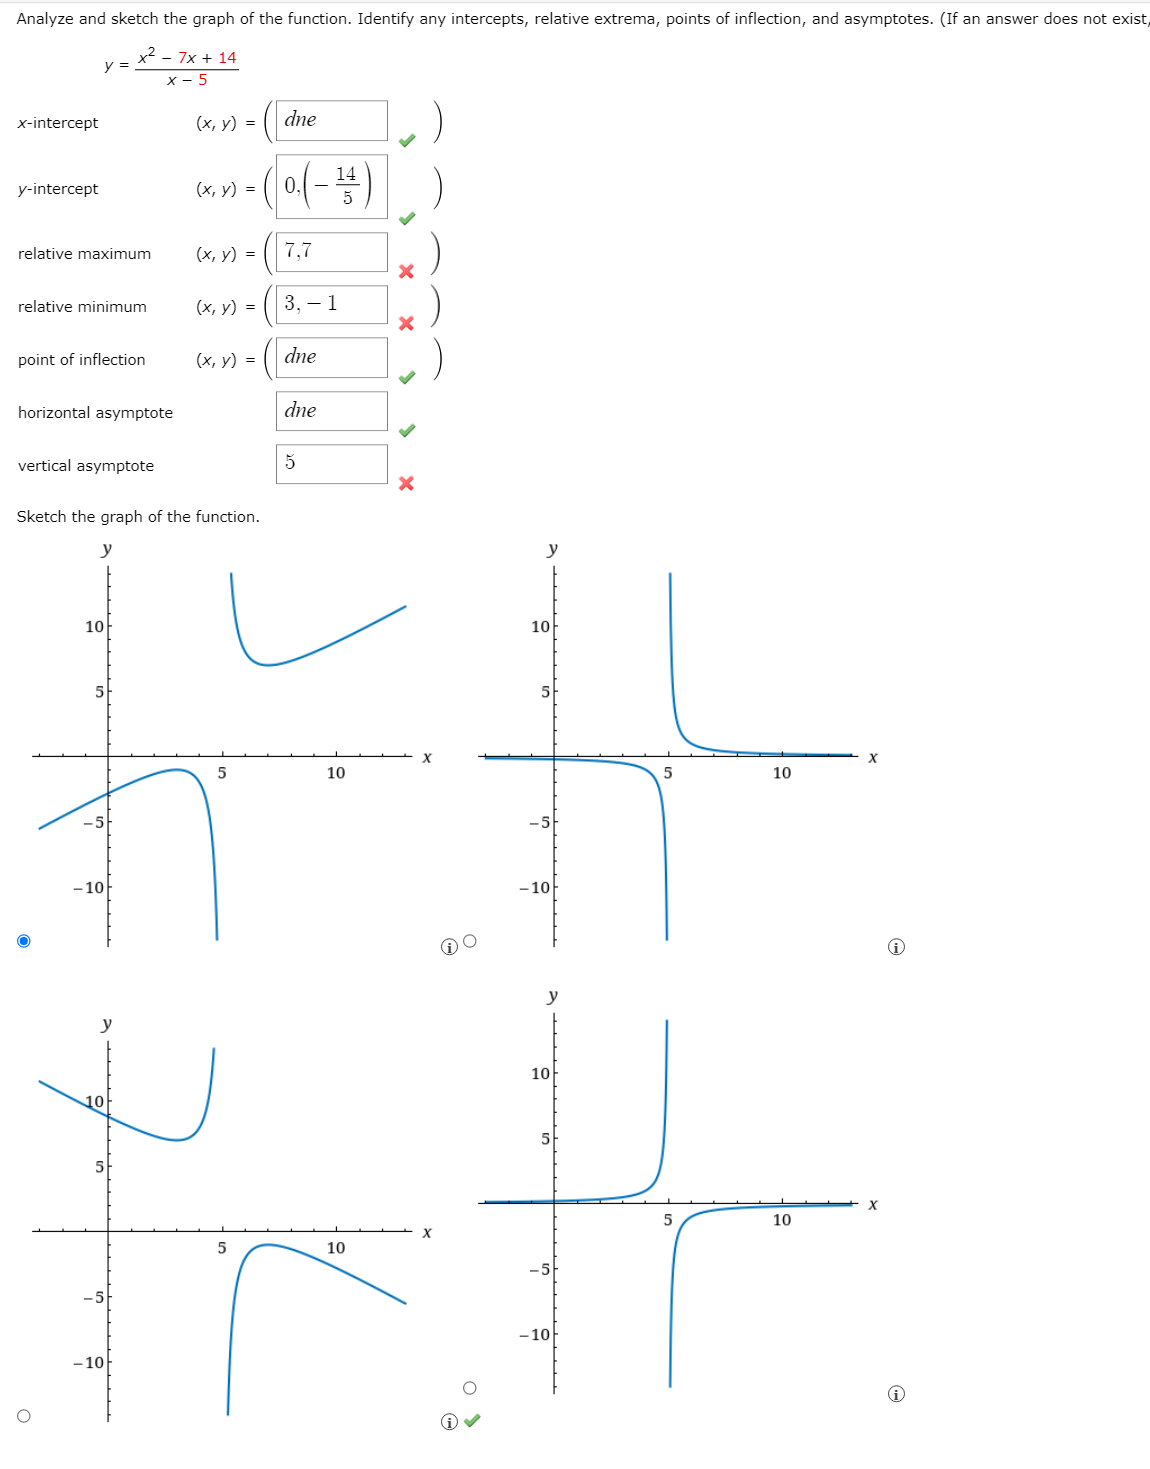 Analyze and sketch the graph of the function. Identify any intercepts, relative extrema, points of inflection, and asymptotes. (If an answer does not exist,
x² – 7x + 14
y =
х — 5
x-intercept
(х, у) %3D
dne
o.(- )
14
y-intercept
(х, у) %3D
relative maximum
(х, у) %3
7,7
relative minimum
(х, у) %3D
3, – 1
point of inflection
(х, у) %3
dne
horizontal asymptote
dne
vertical asymptote
5
Sketch the graph of the function.
y
y
10
10
5
5
X
10
10
-5
-5
-10
-10
y
%23
y
10
10
5-
5
10
10
-5
-10
-10
